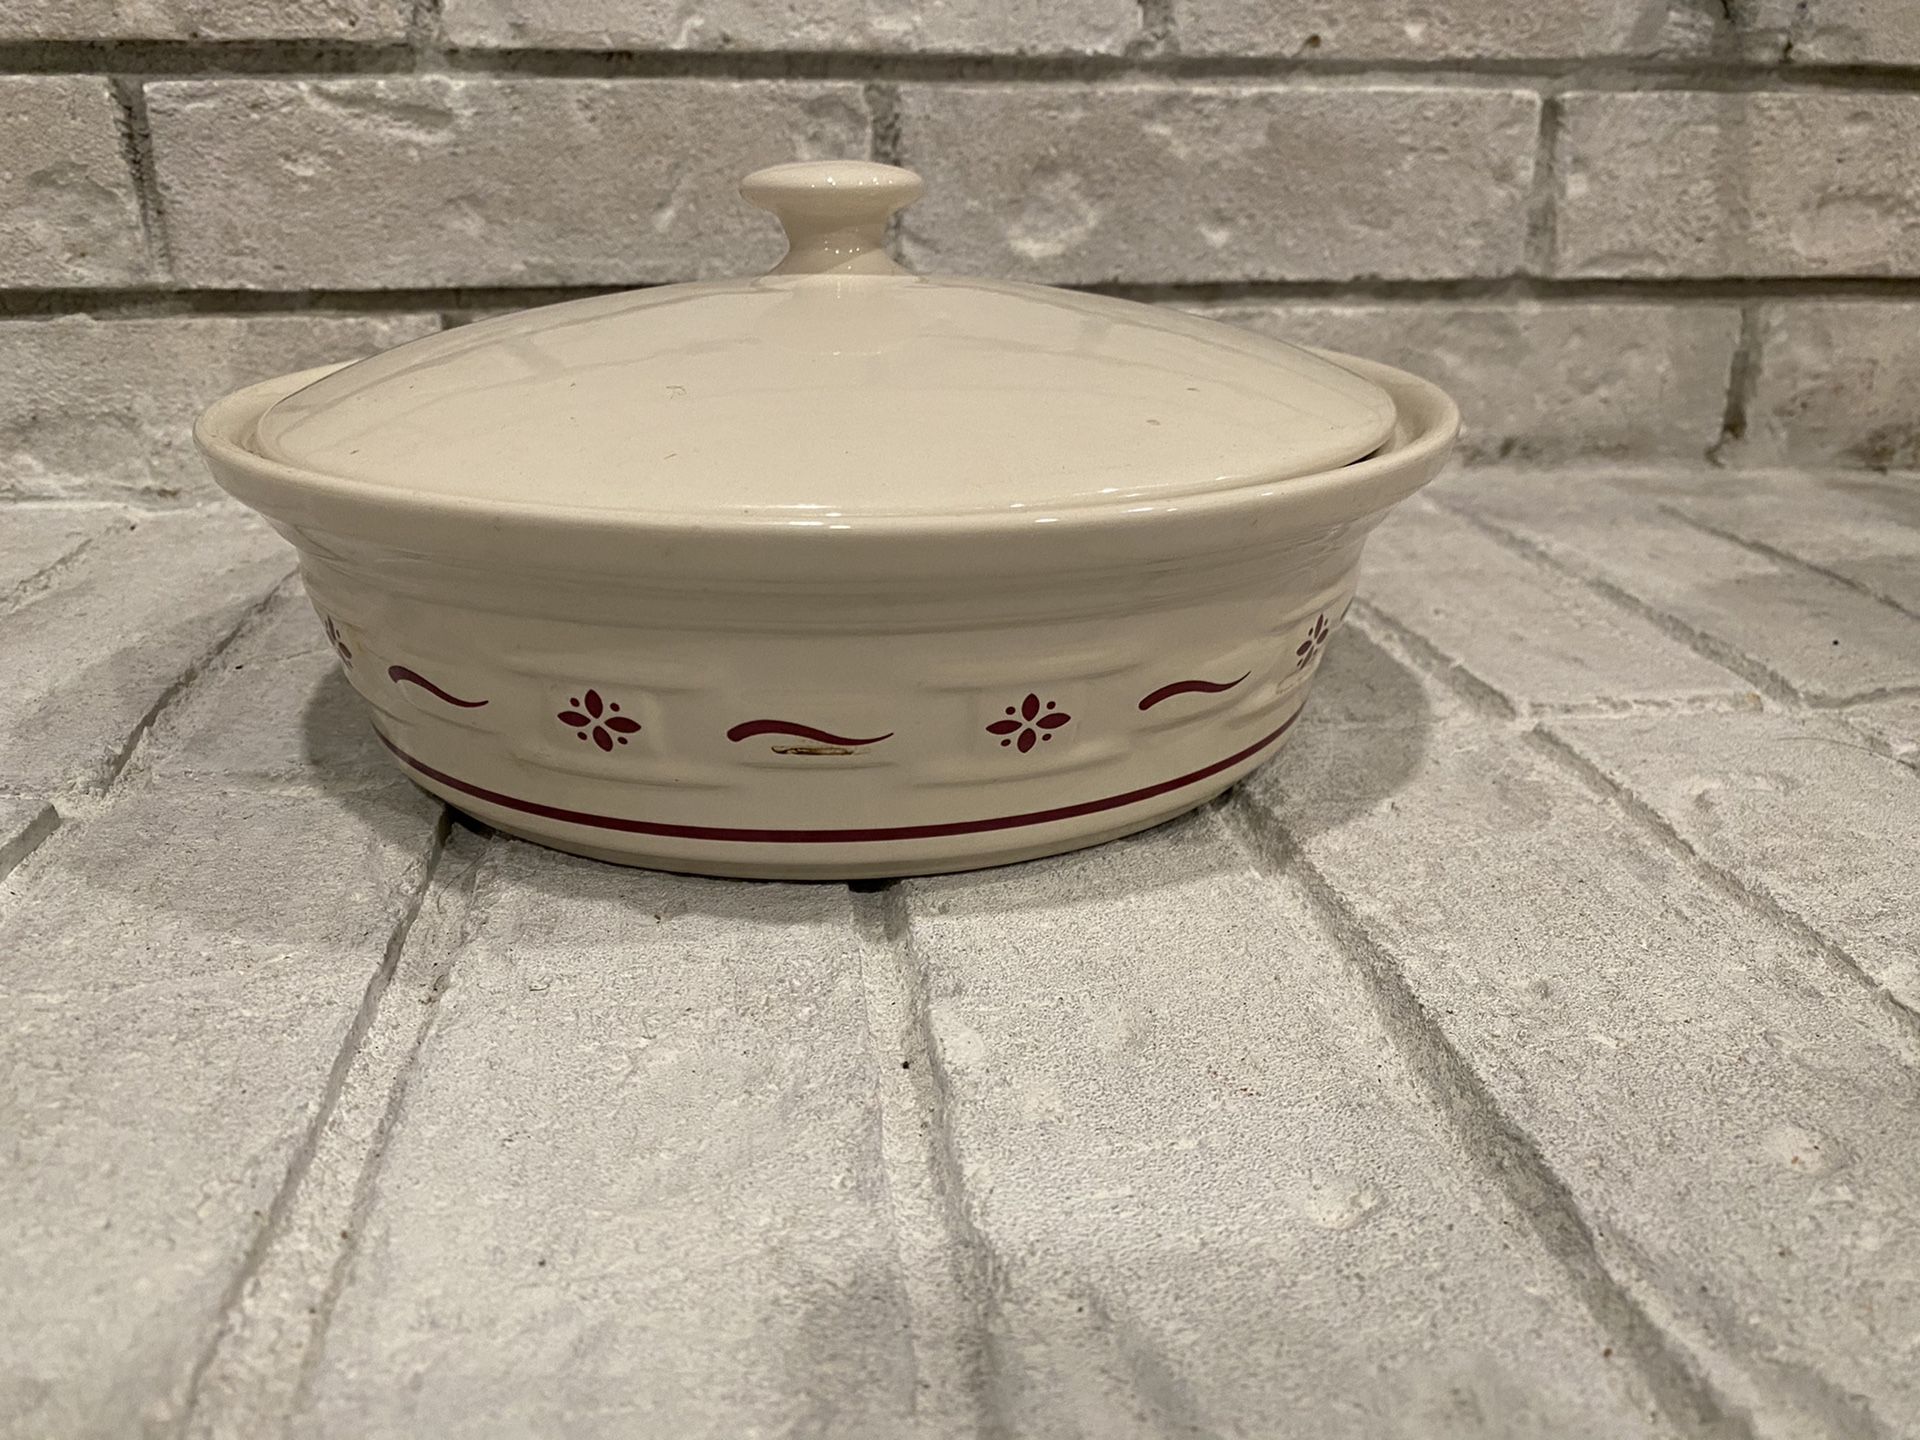 Longaberger Pottery Wove Traditions Red Covered Casserole Dish